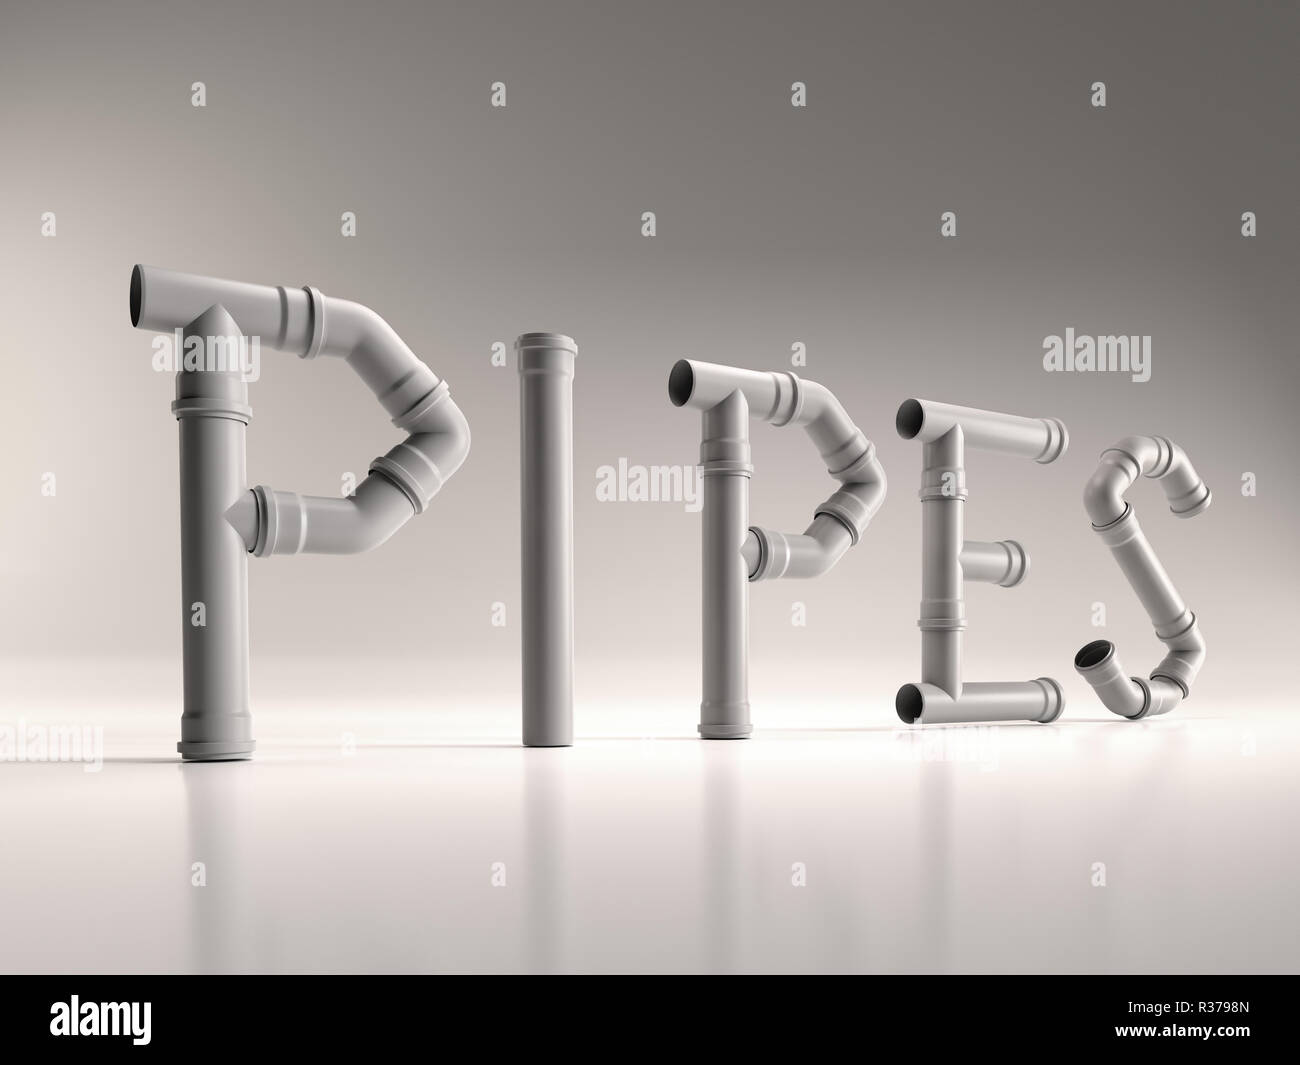 PIPE word arranged from different PVC piping elements Stock Photo